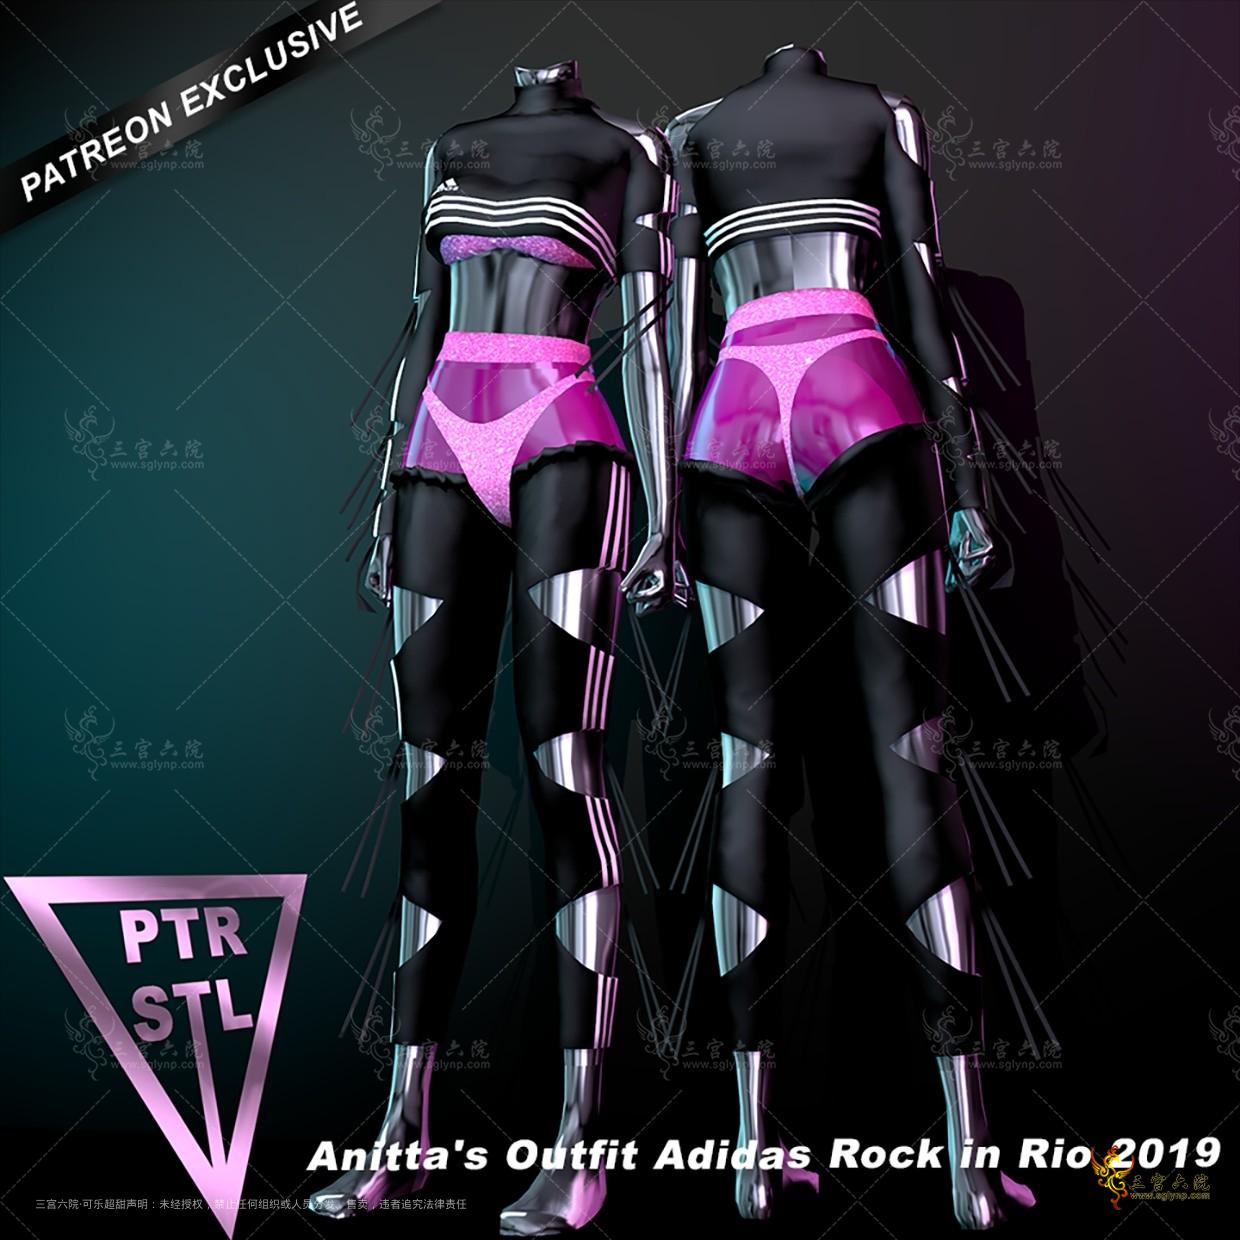 Pietro's Style Anitta's Outfit Adidas Rock in Rio 2019.png